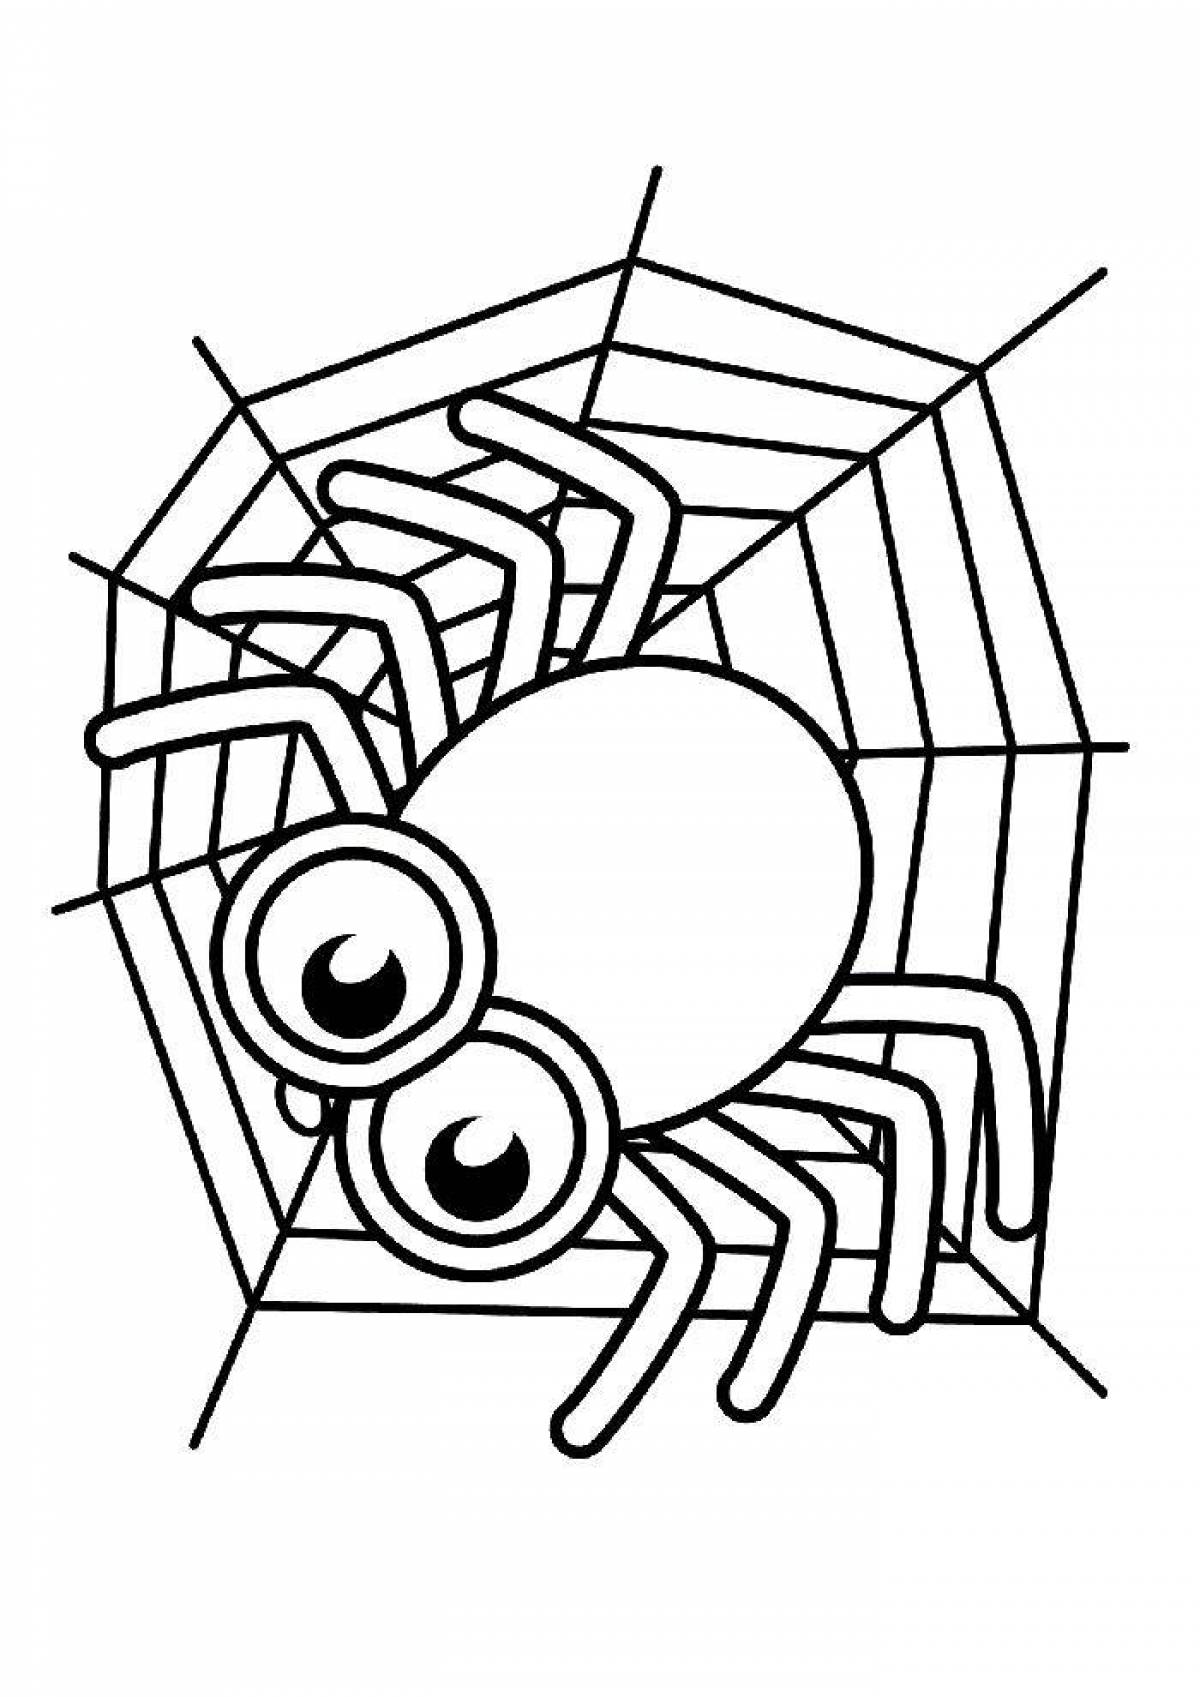 Coloring majestic spider